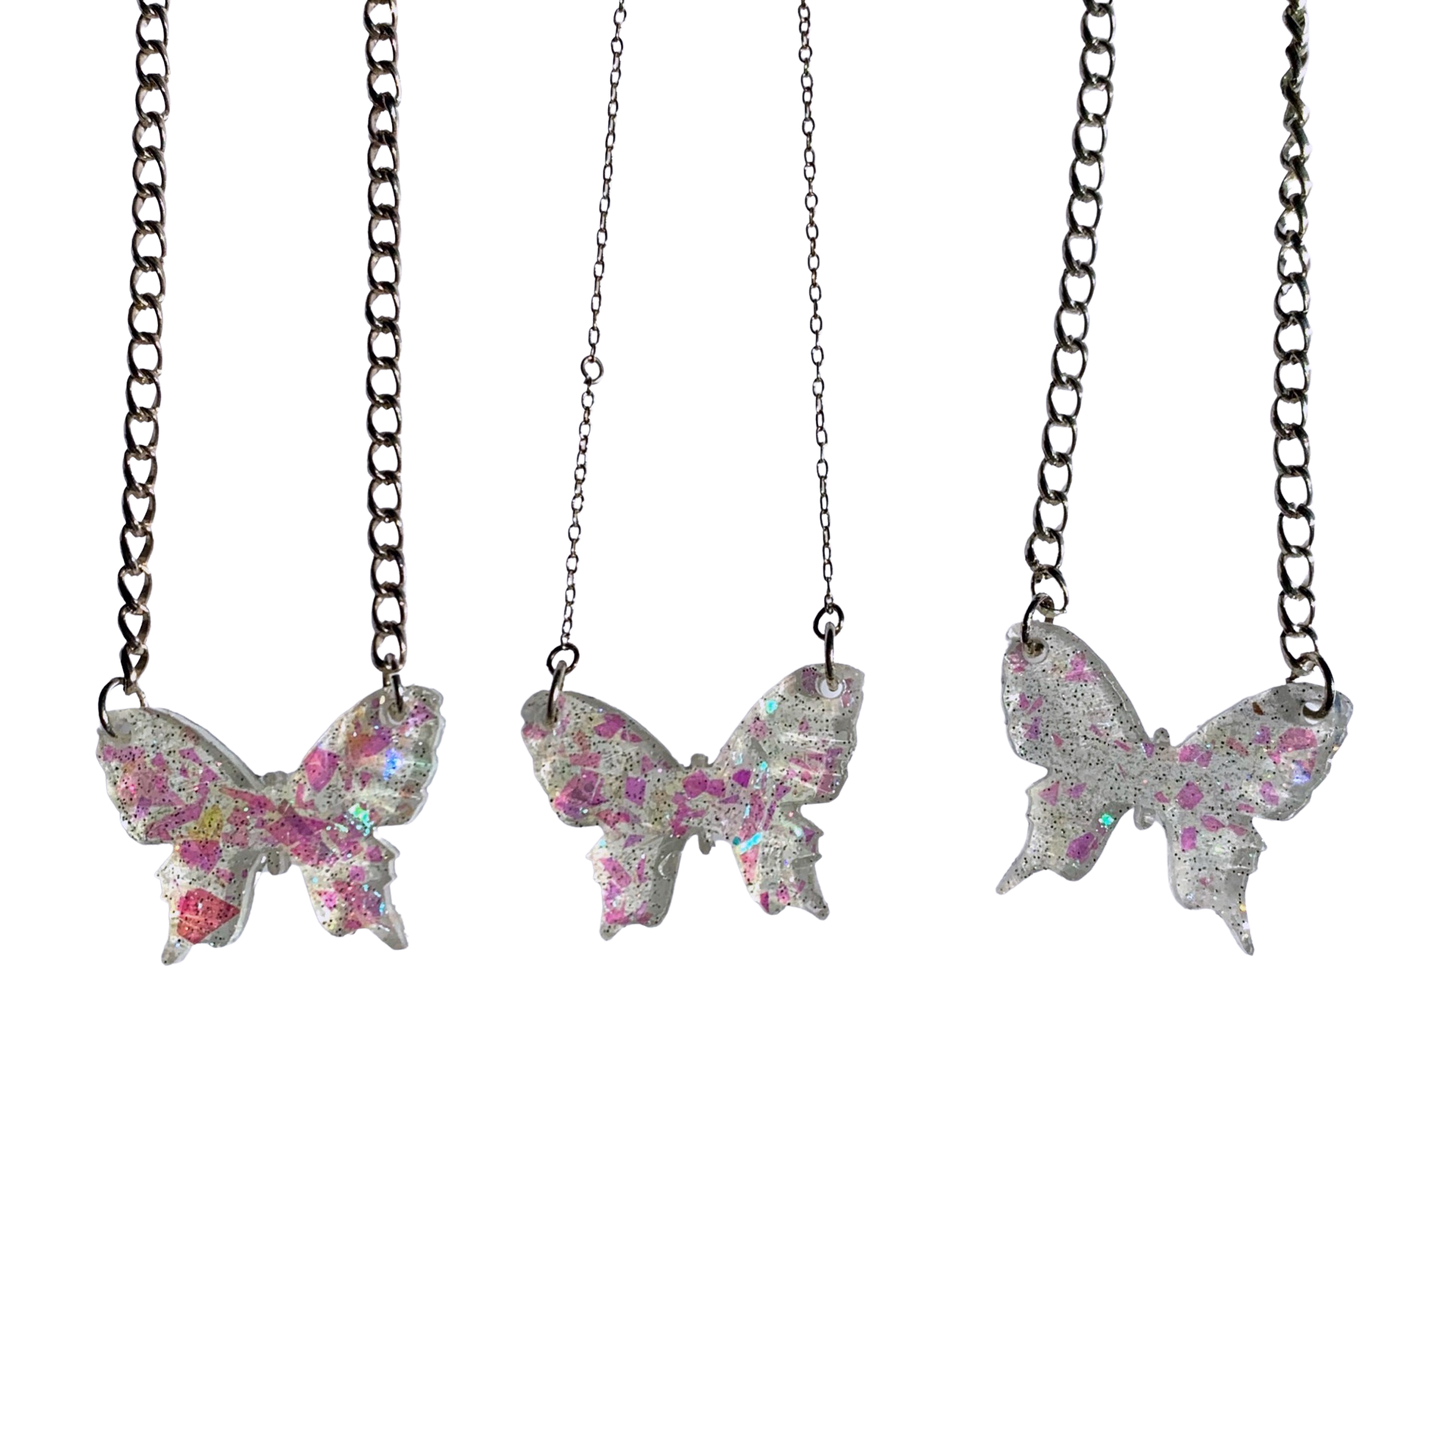 Sparkly Off White Butterfly Necklace with Iridescent Glitter